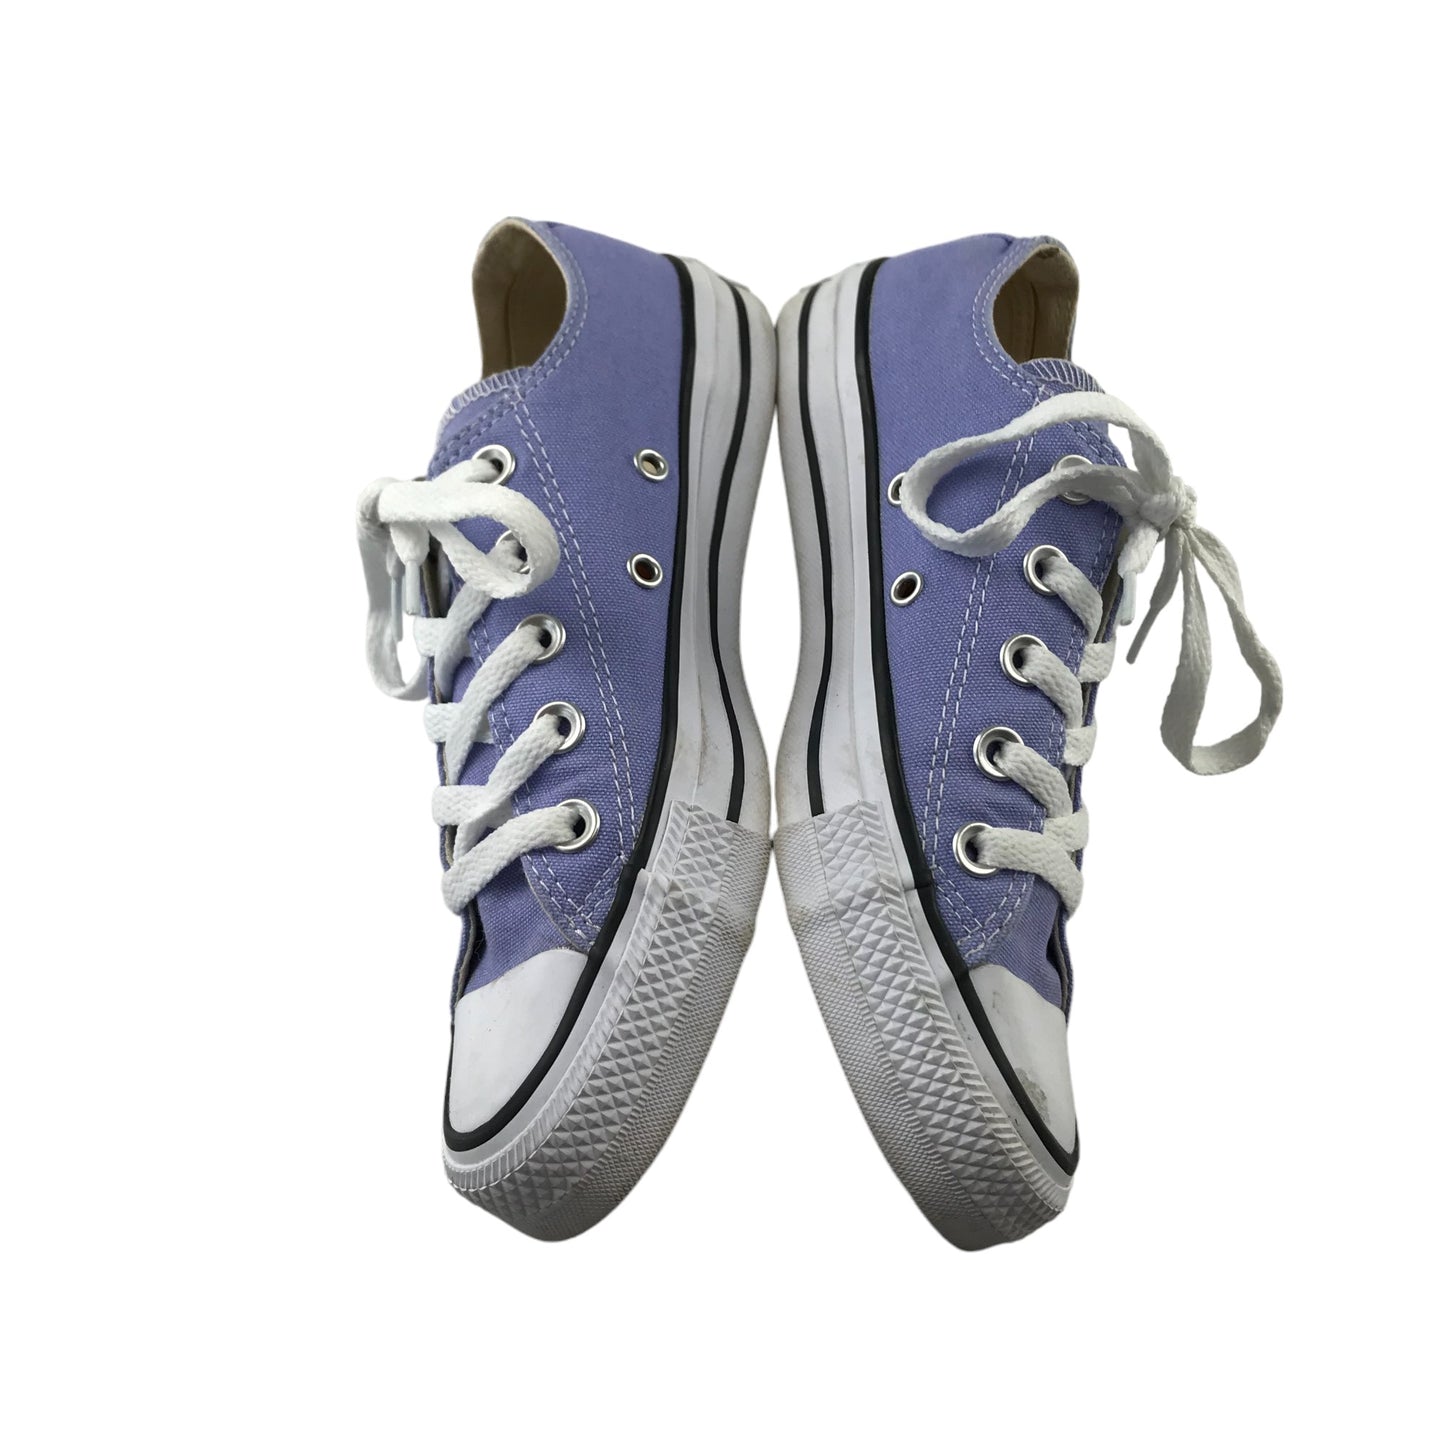 Converse Trainers Shoe Size 3 Lilac All Star Chuck Taylor Low Top